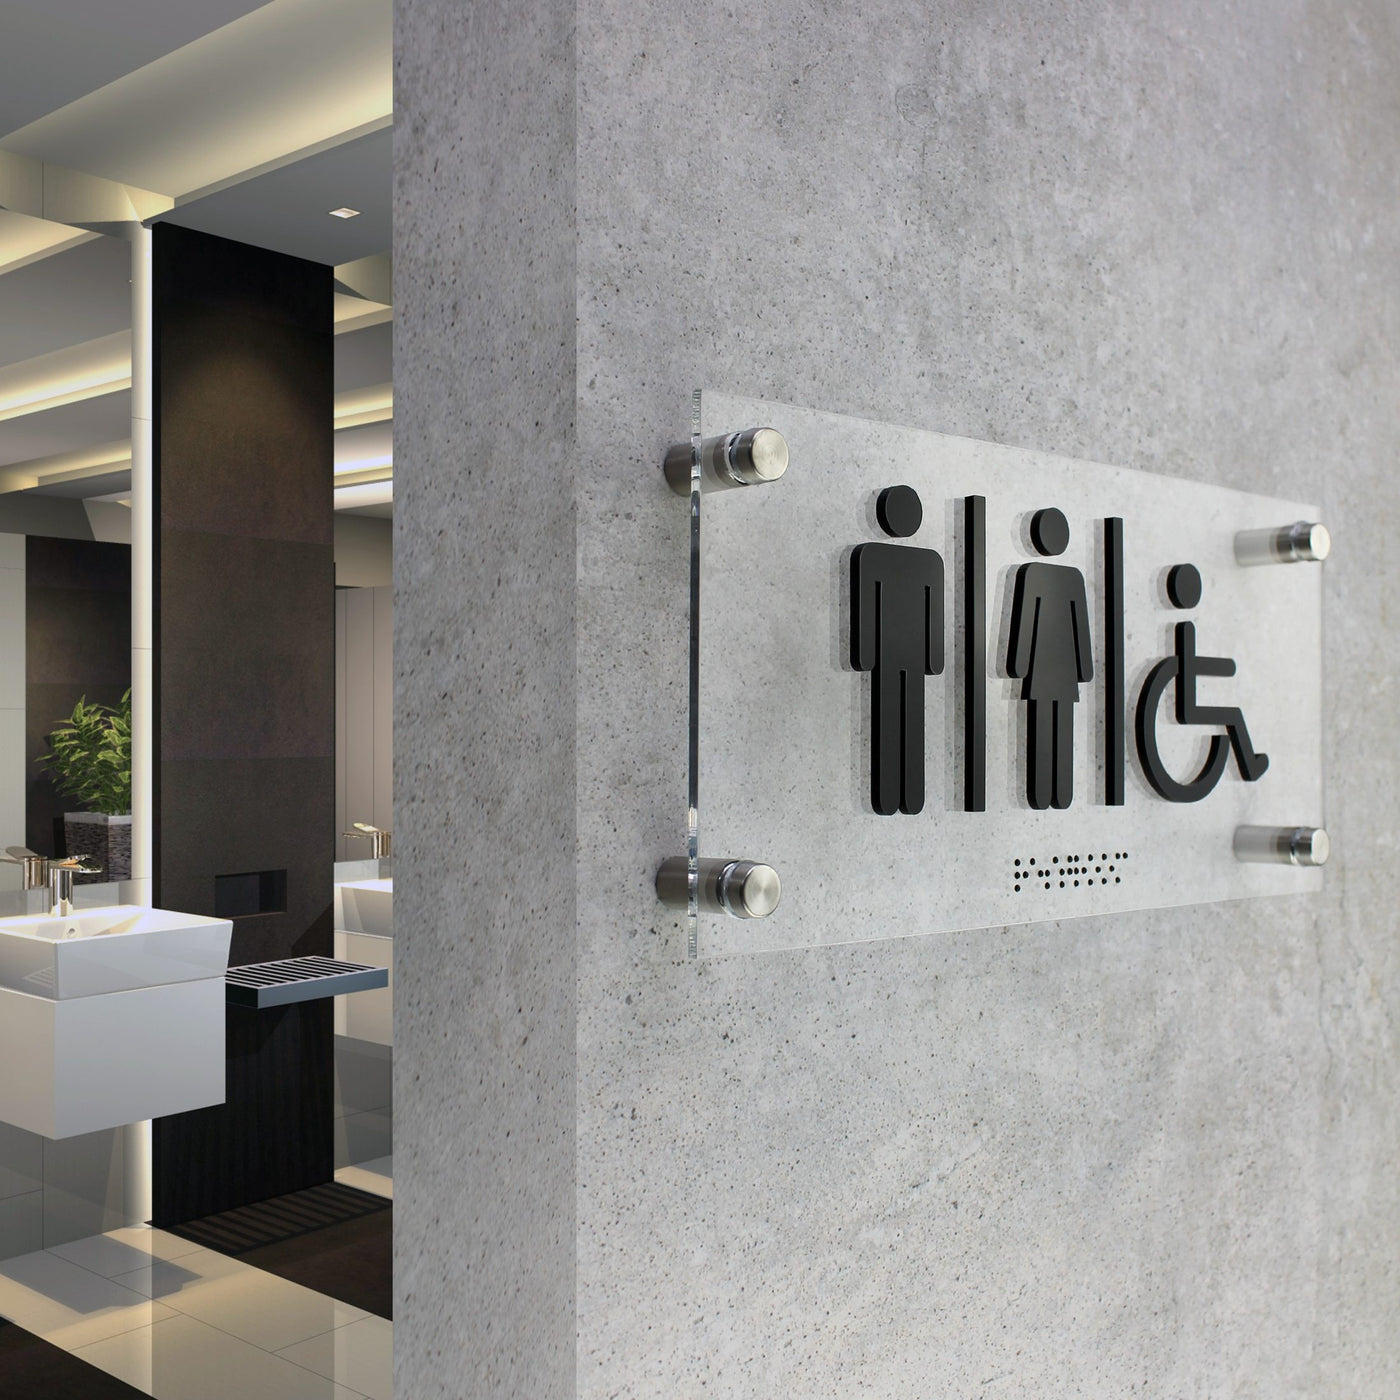 All Gender Restroom Sign: Acrylic Sign with Steel Holders — "Classic" Design